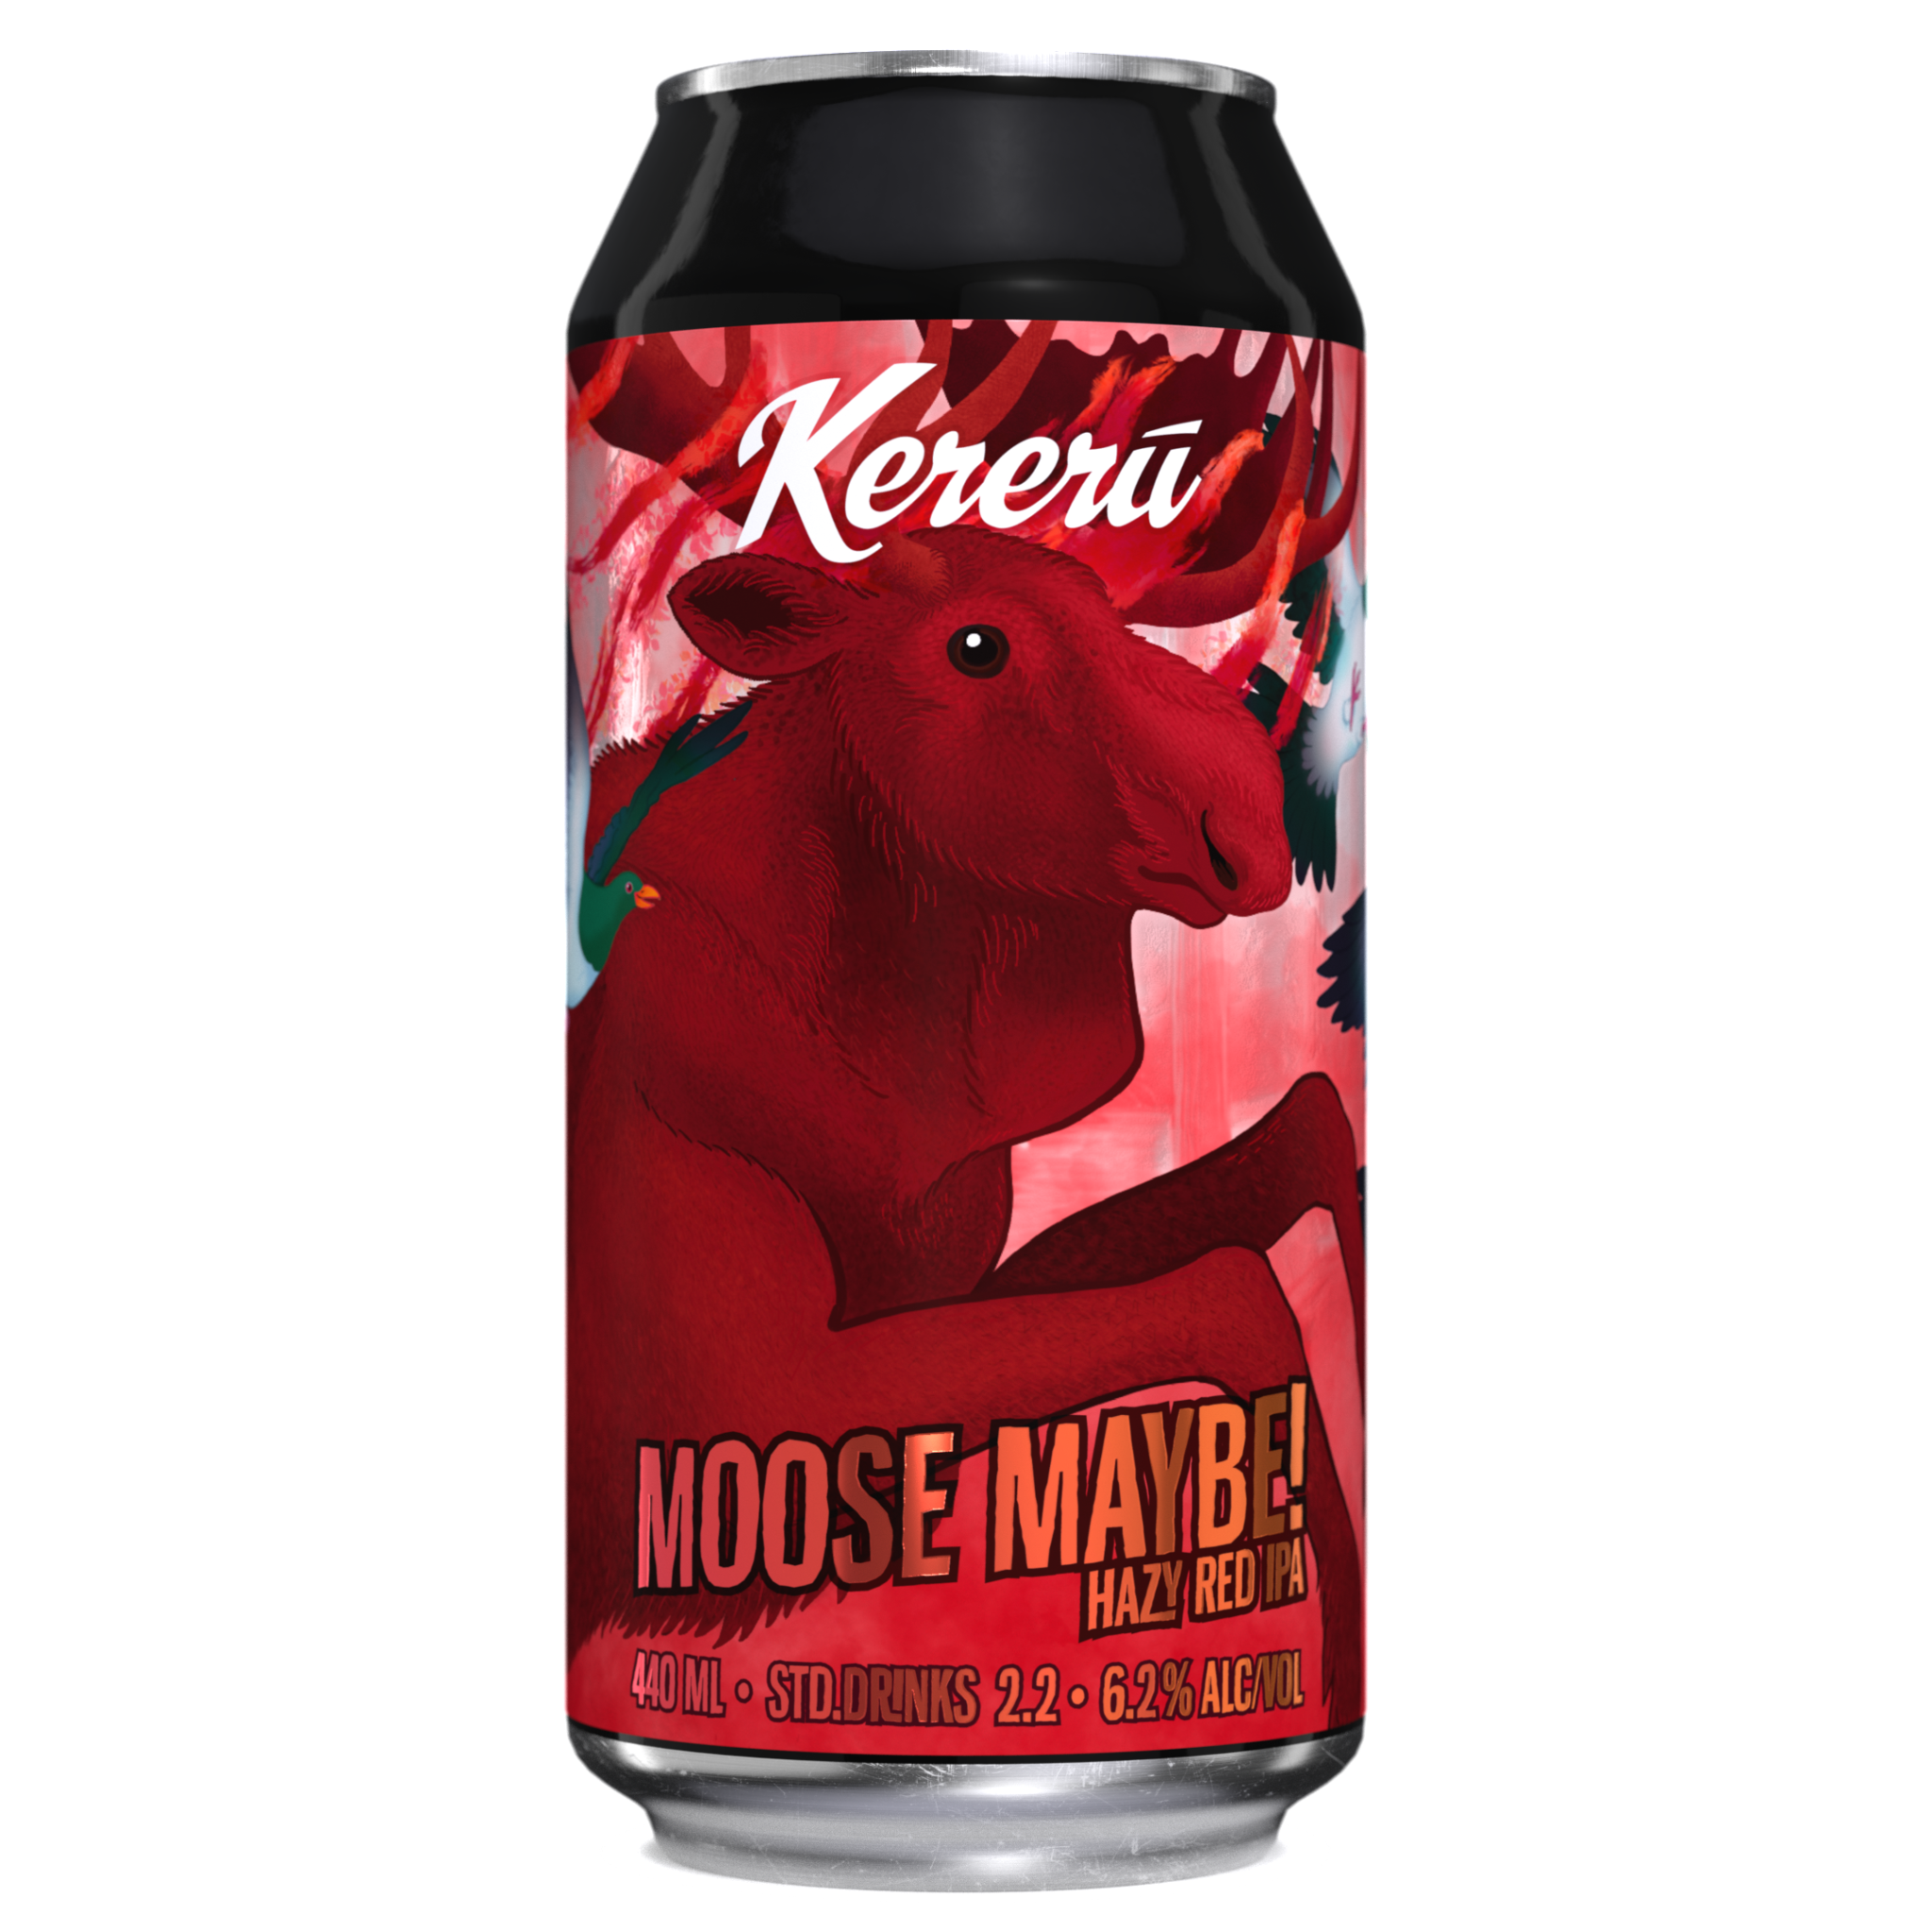 Featured Beer: Moose Maybe